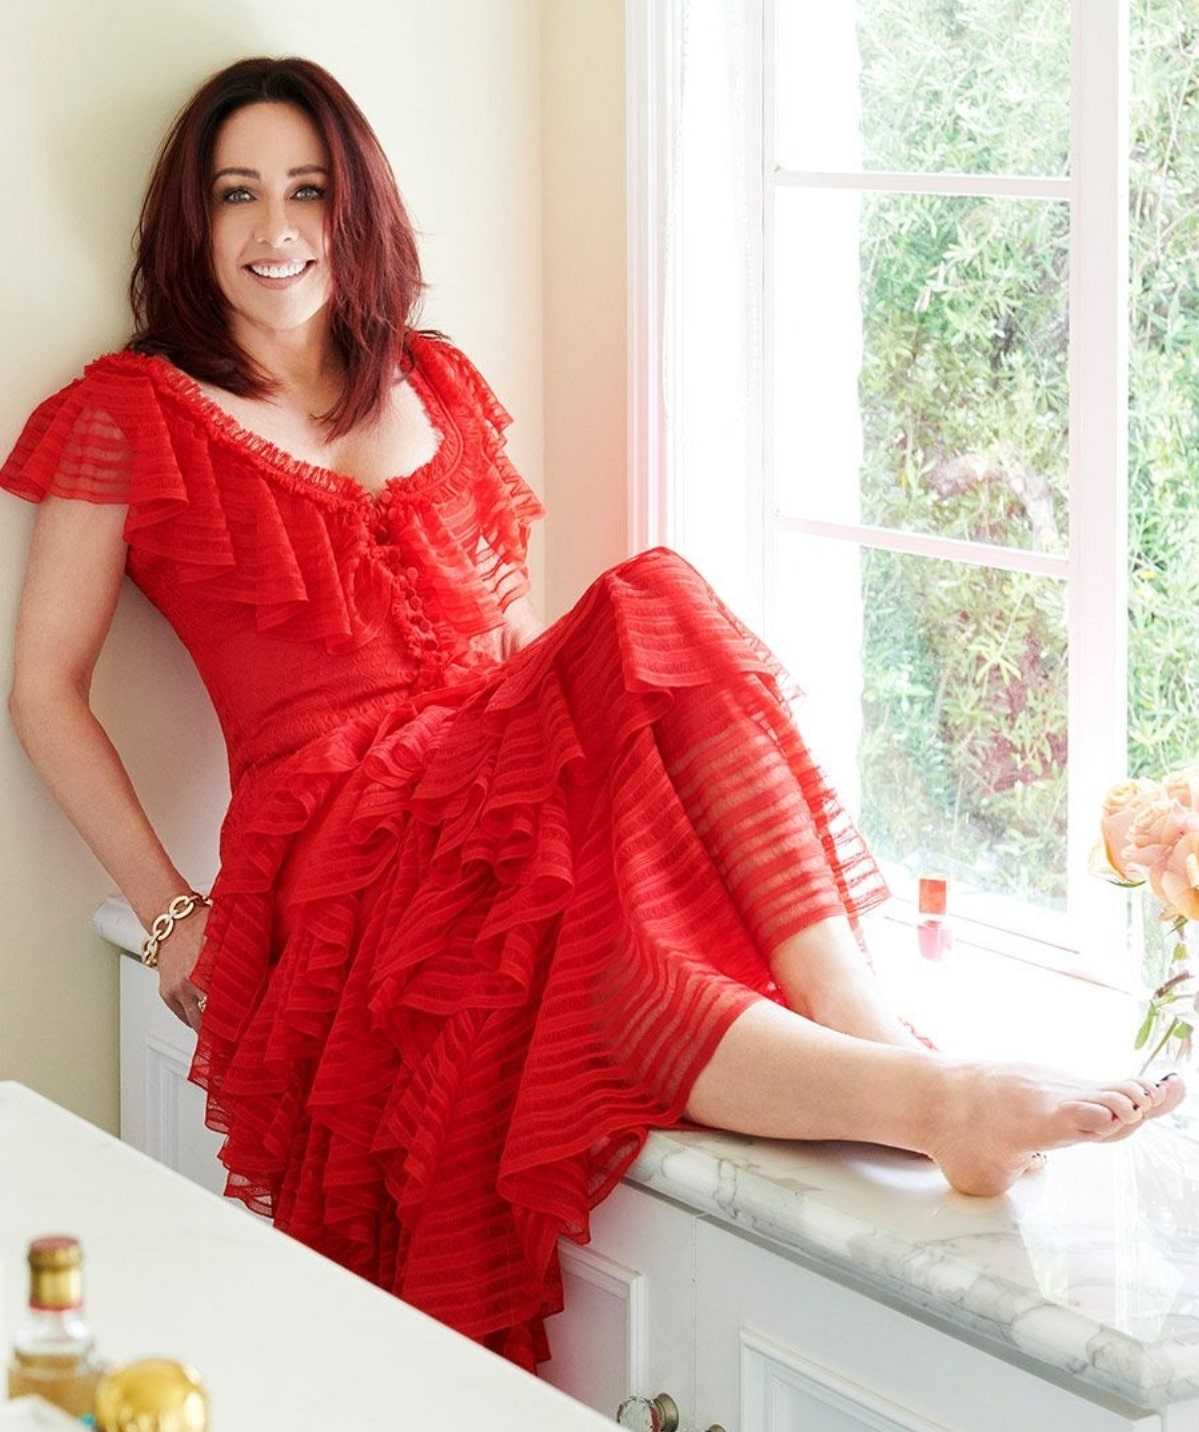 Nude Pictures Of Patricia Heaton That Make Certain To Make You Her